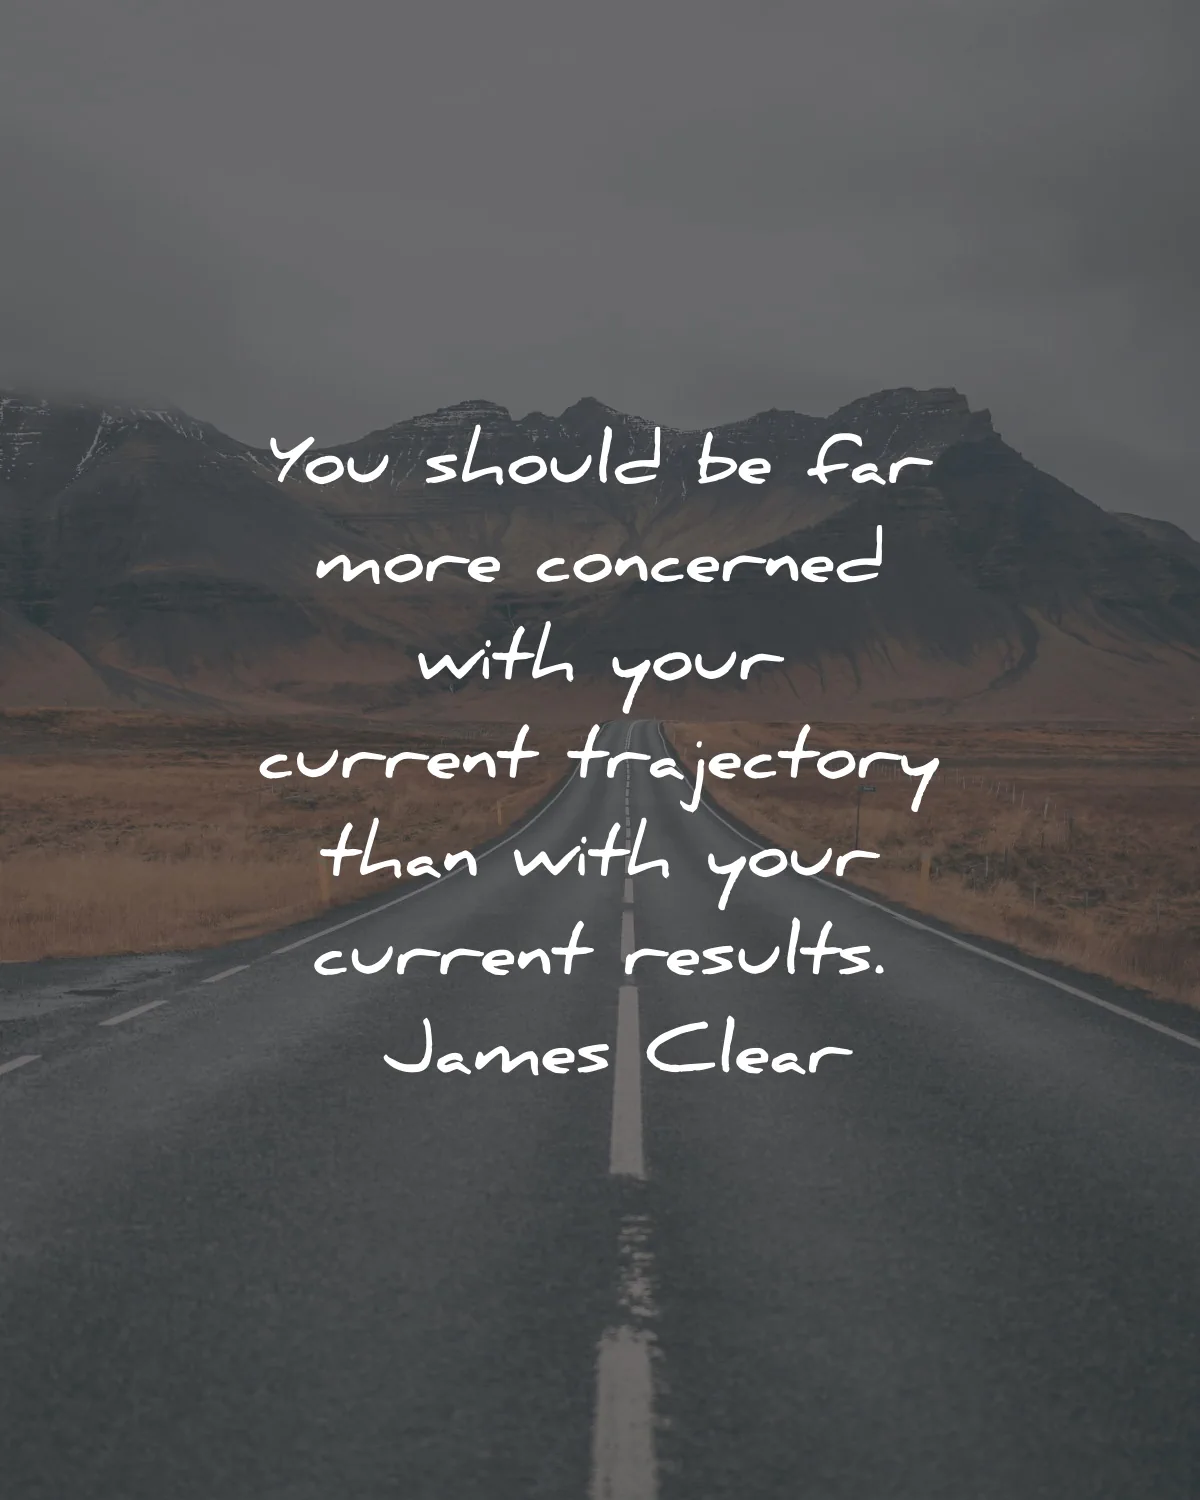 atomic habits quotes james clear should concerned trajectory results wisdom